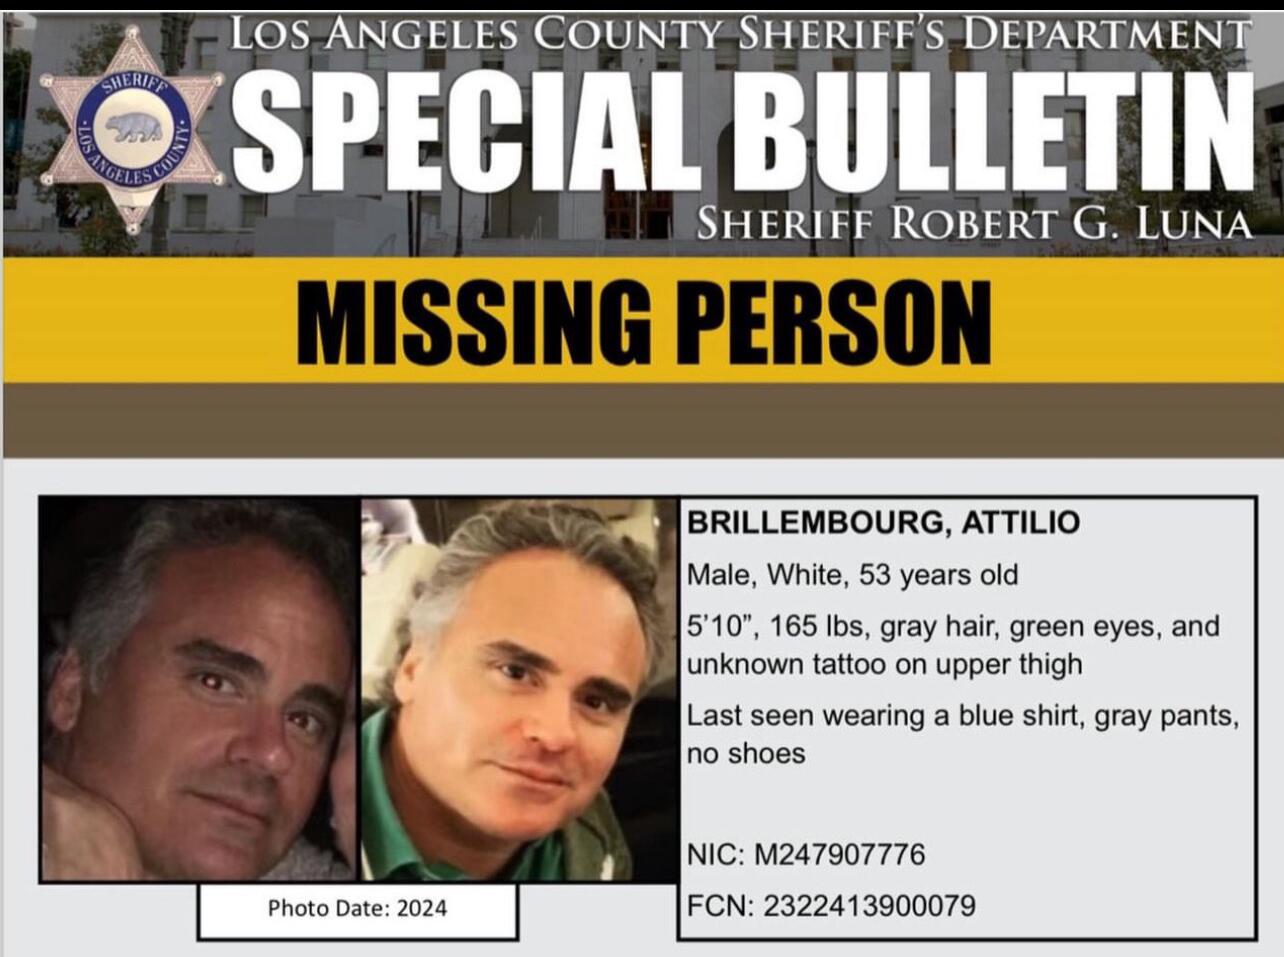 L.A. County Sheriff's Department asking for public's help in finding New York man missing in Malibu